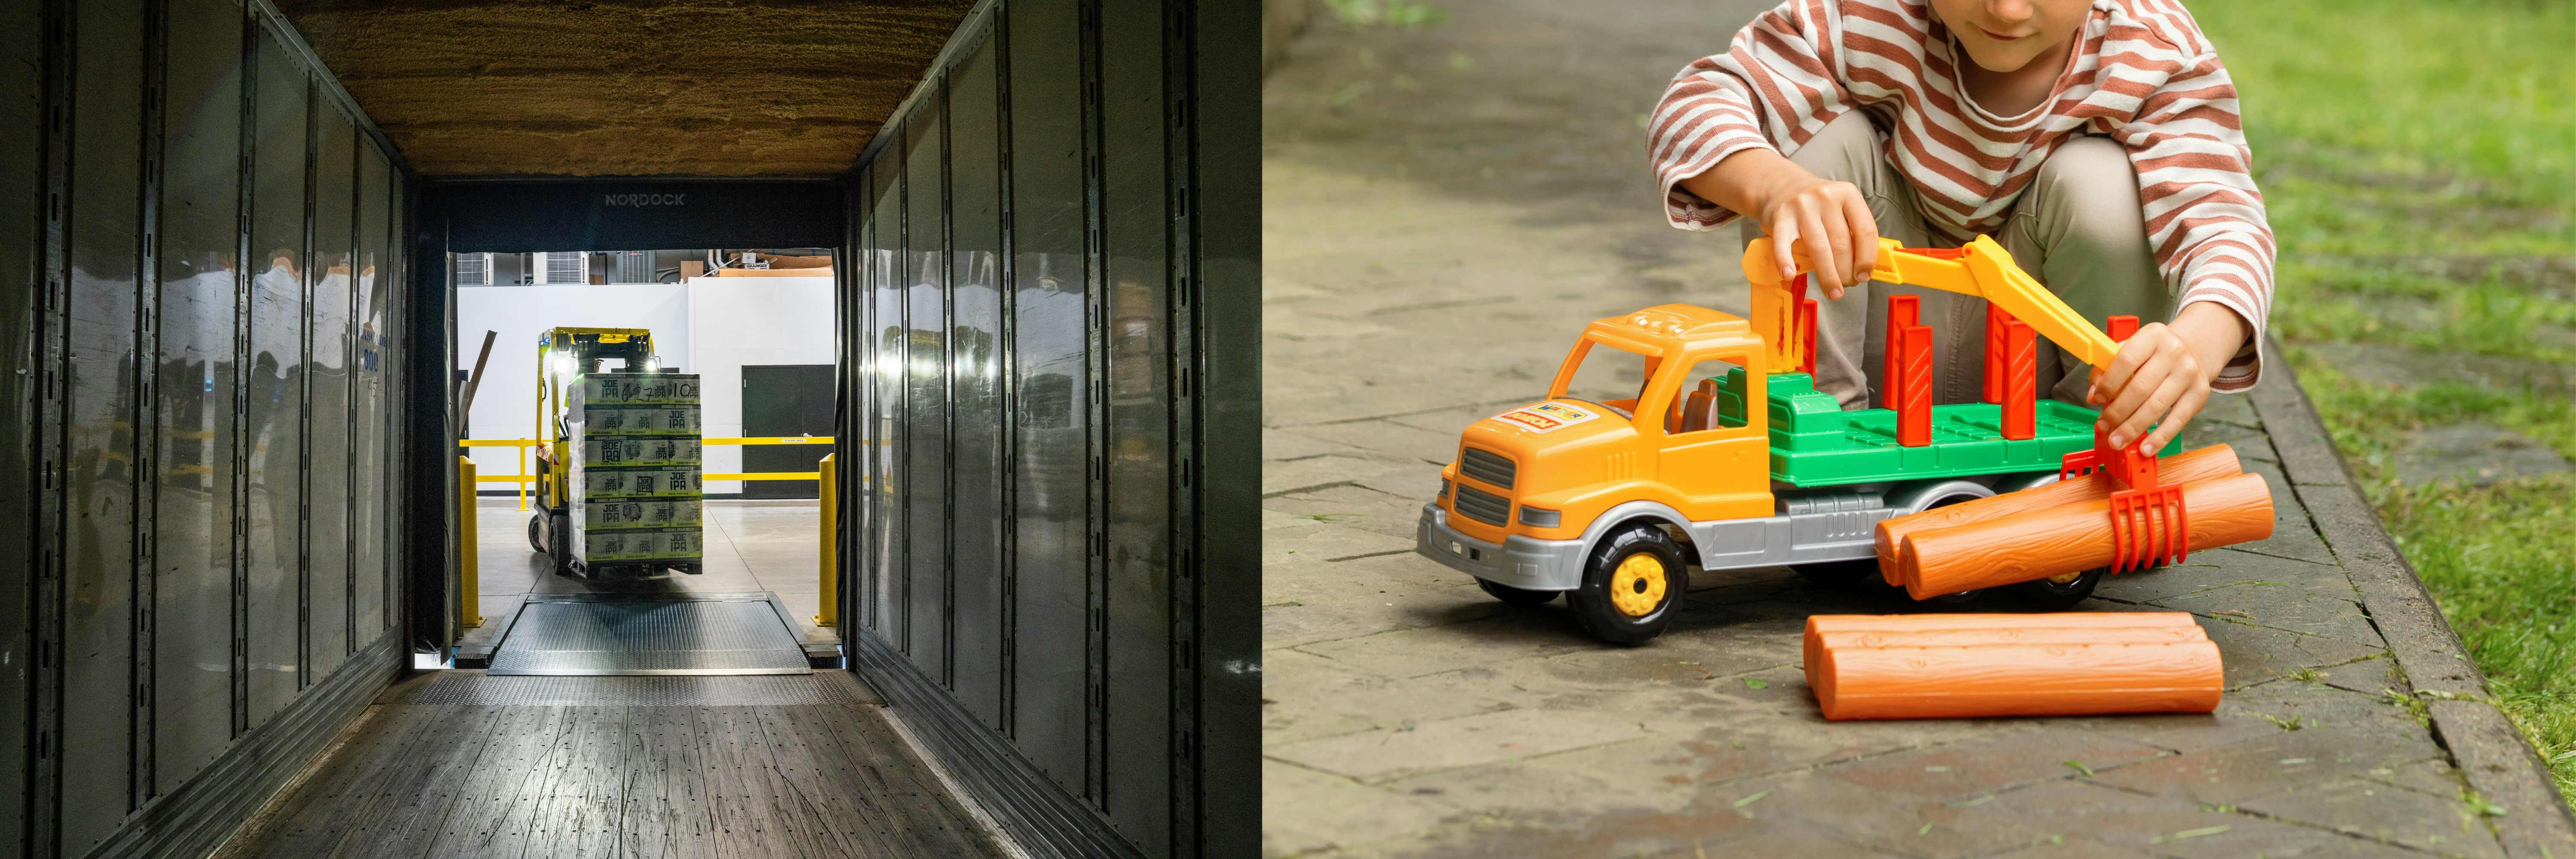 Image of a forklift truck loading a lorry alongside image of a child loading toys onto a toy truck.